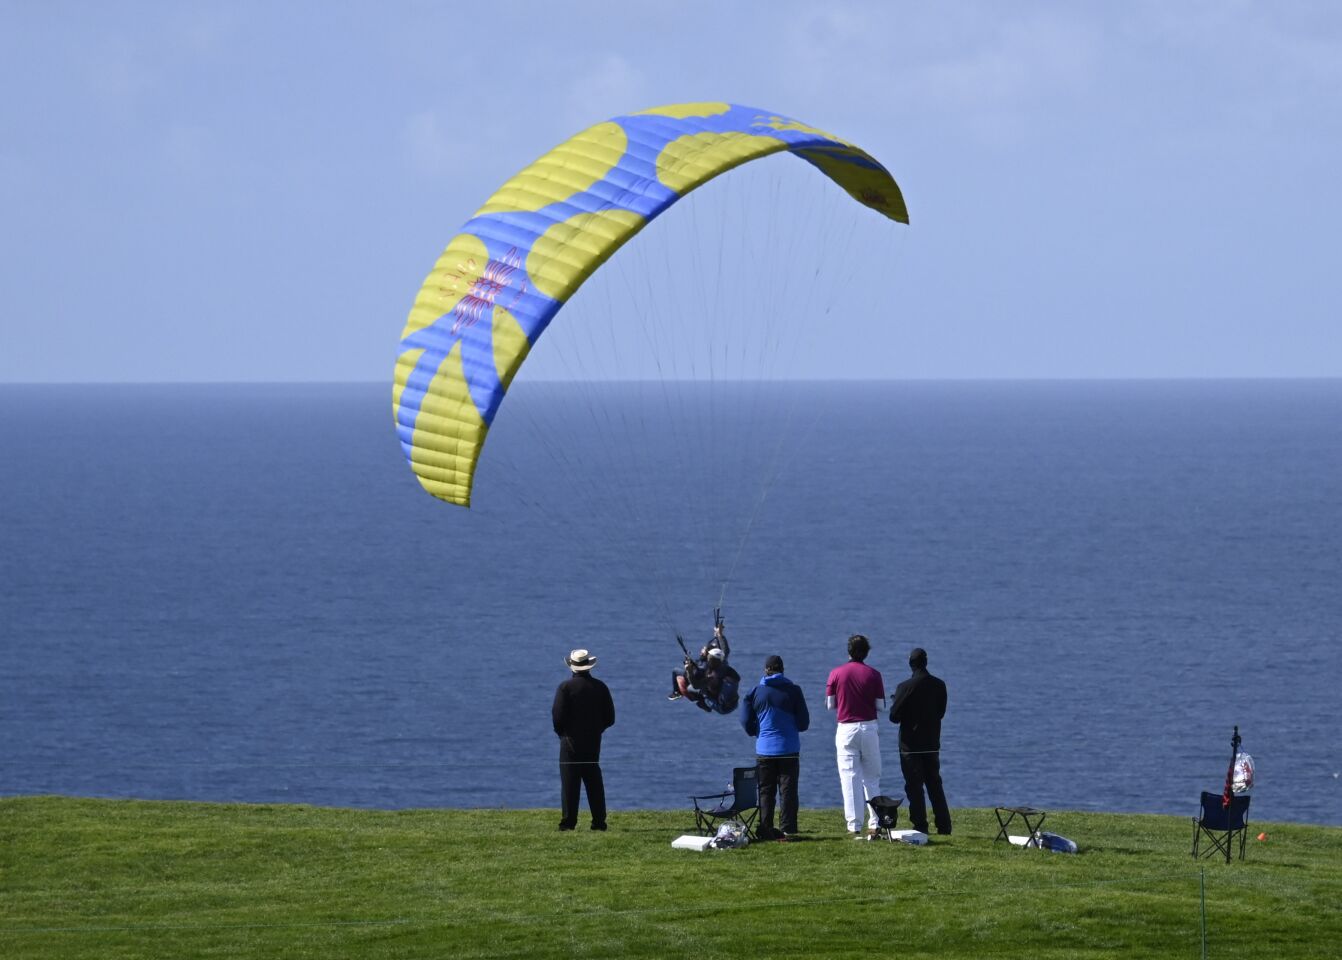 A group of golfers watch a paraglider on the fourth hole of the South Course during the second round of the Farmers Insurance Open golf tournament at Torrey Pines, Friday, Jan. 29, 2021, in San Diego. (Photo by Denis Poroy)